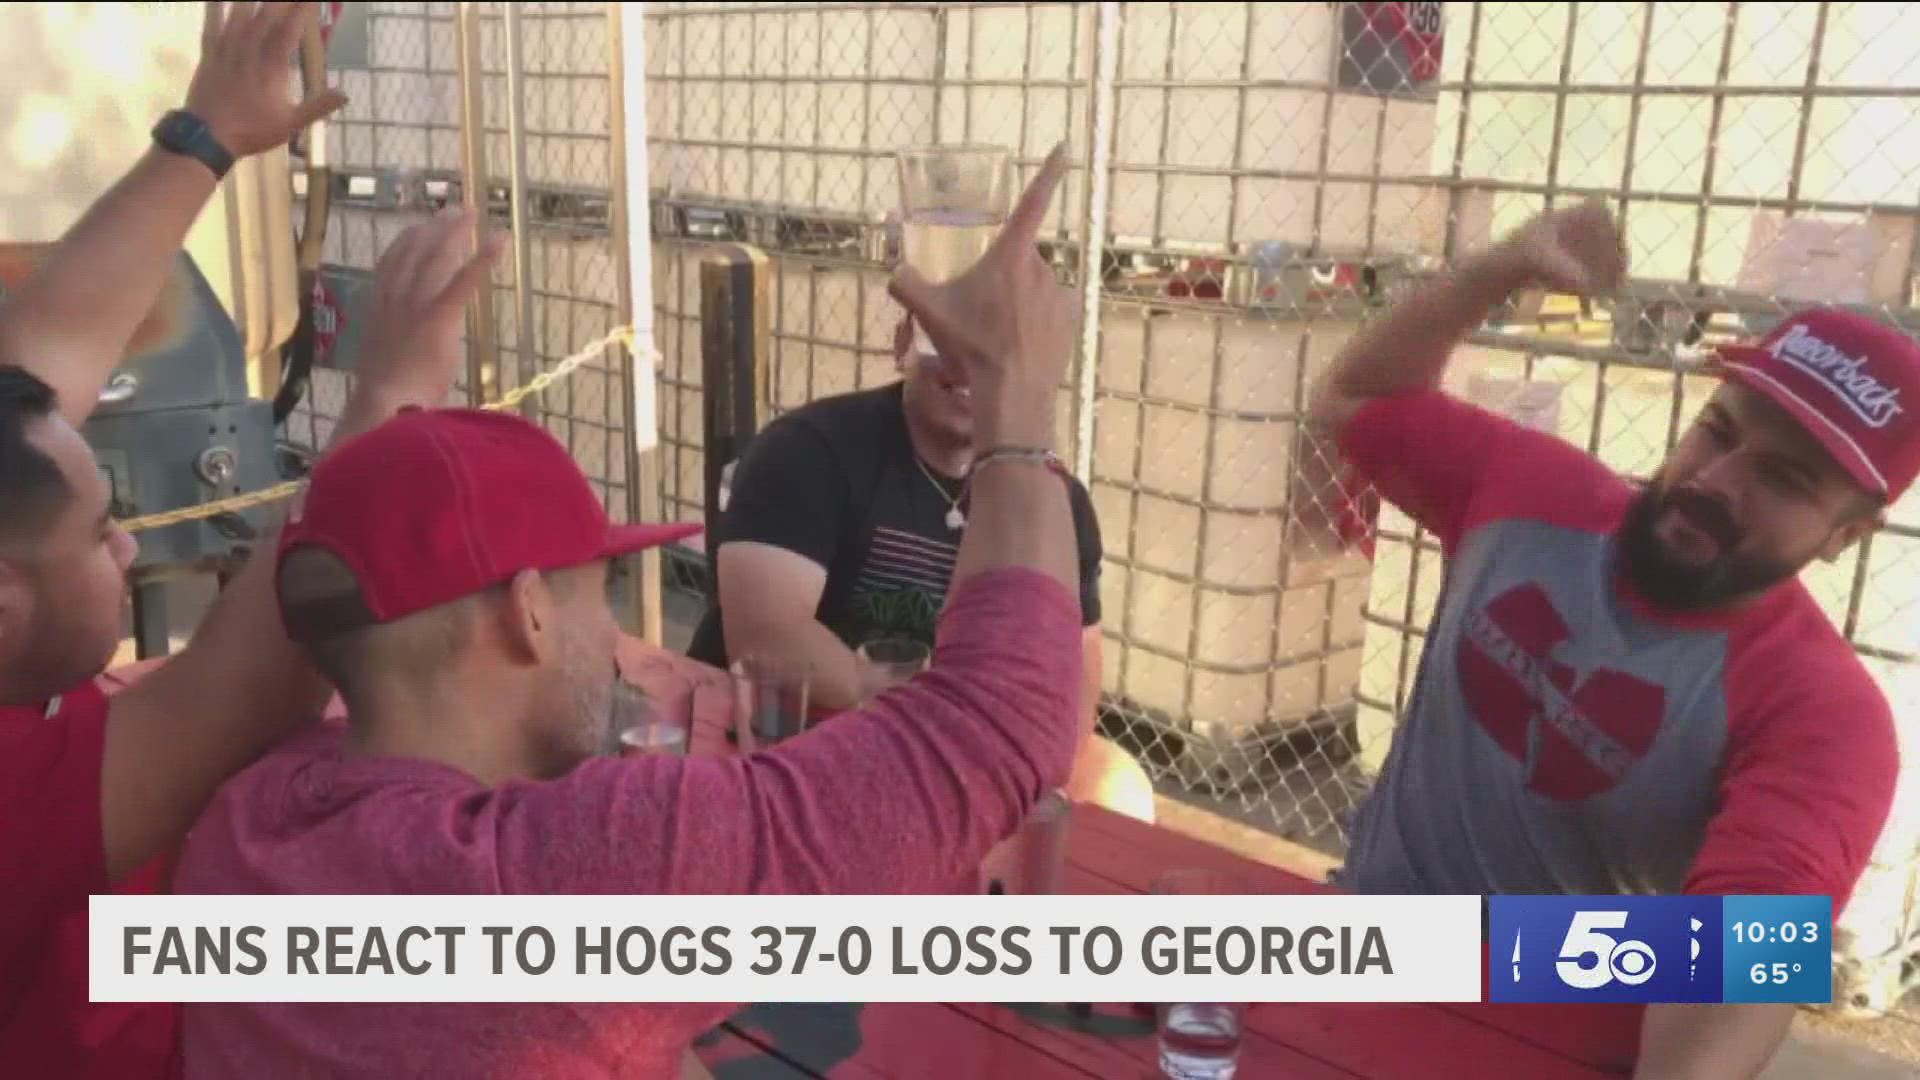 The Hogs are now four and one, facing their first loss against Georgia. However, fans say they will continue to cheer on the Hogs.